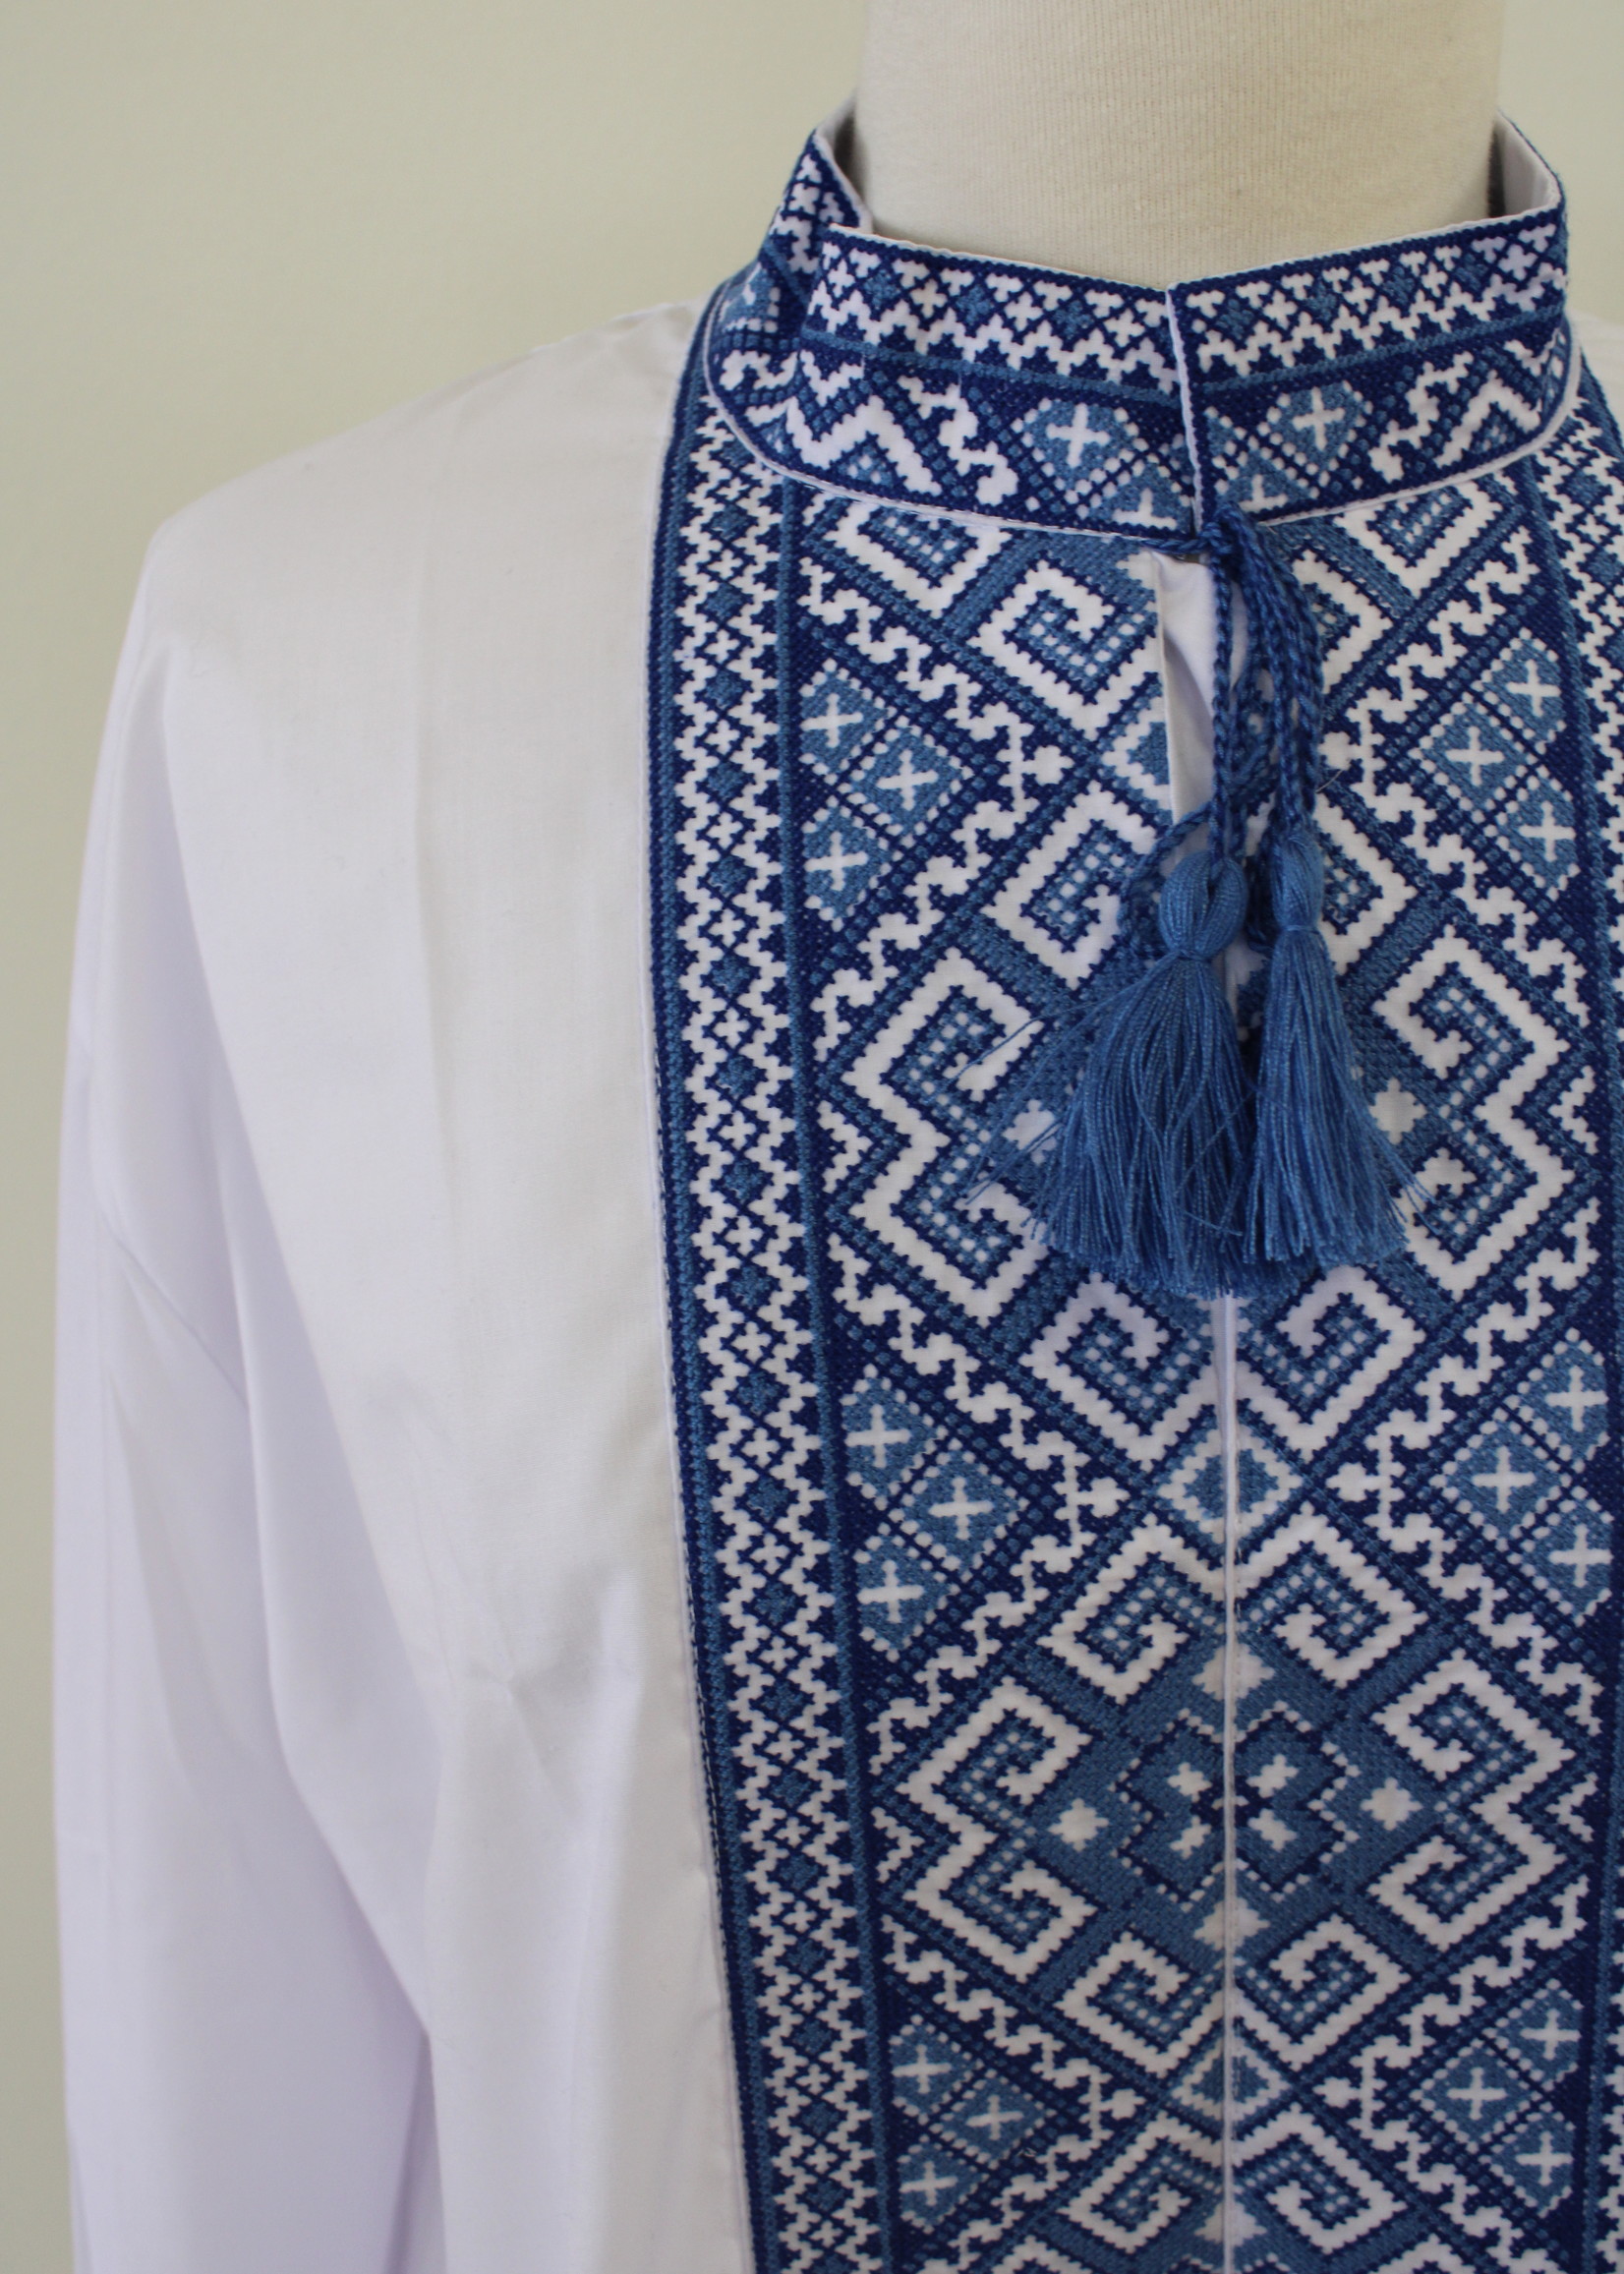 White Long Sleeve Shirt with Blue Embroidery XL